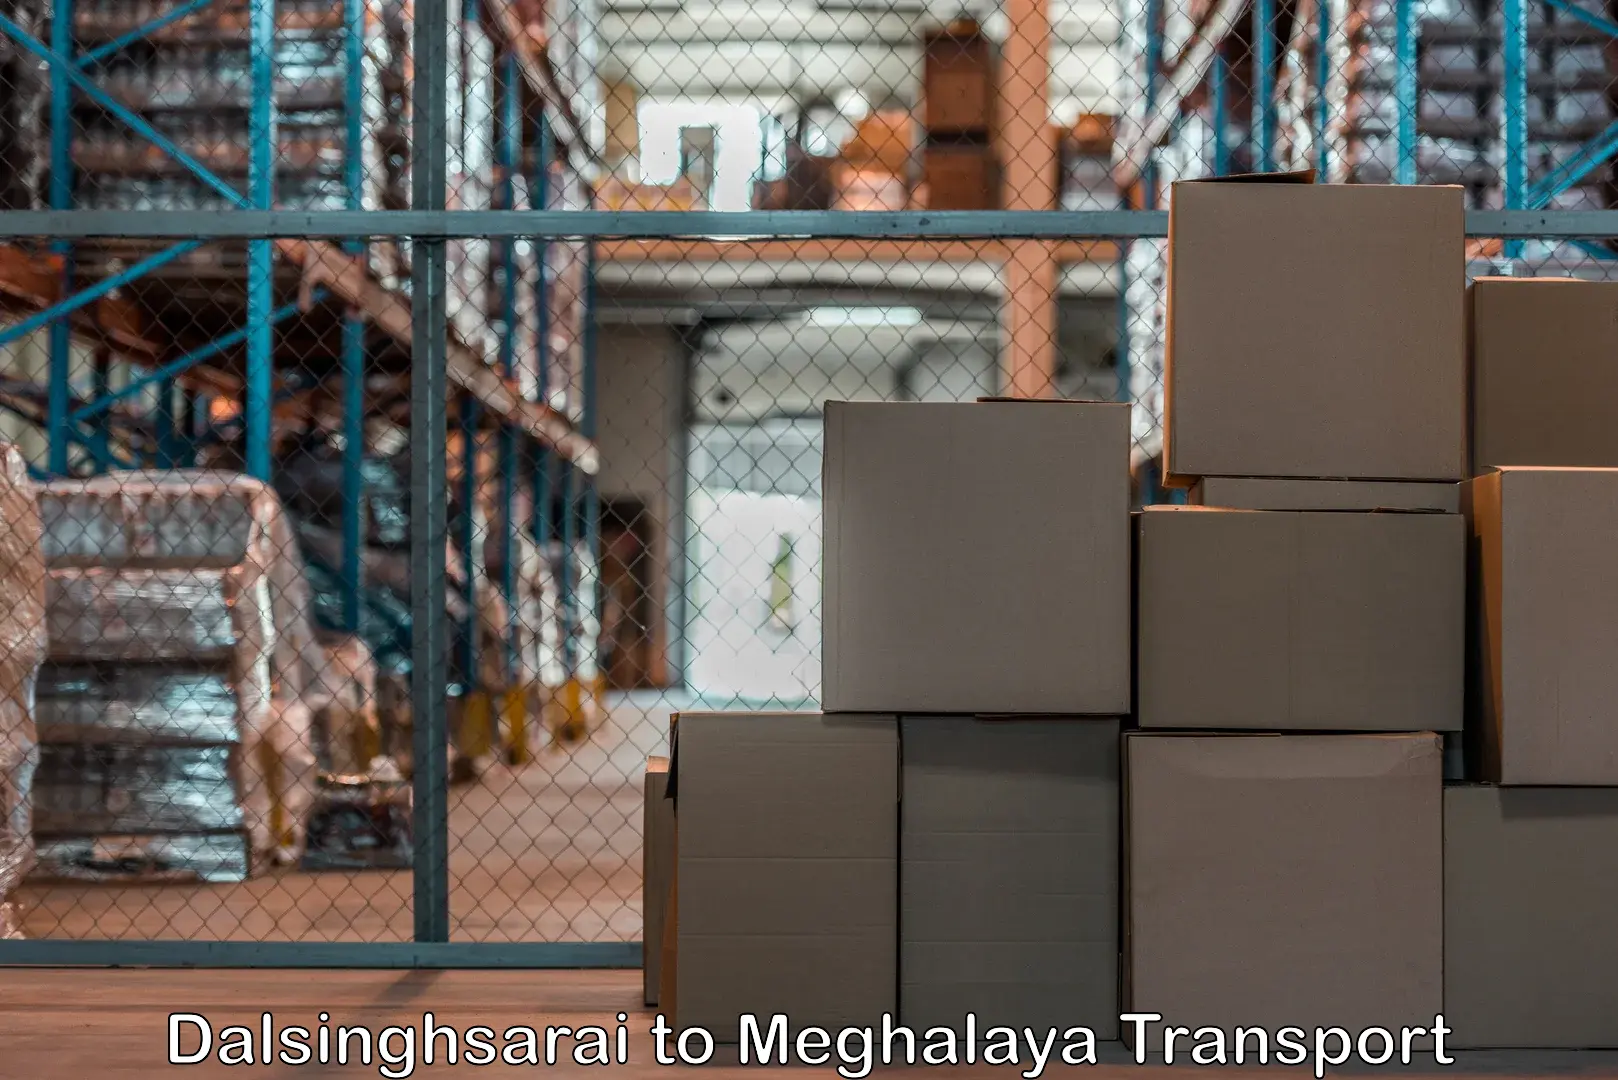 Air freight transport services Dalsinghsarai to Meghalaya